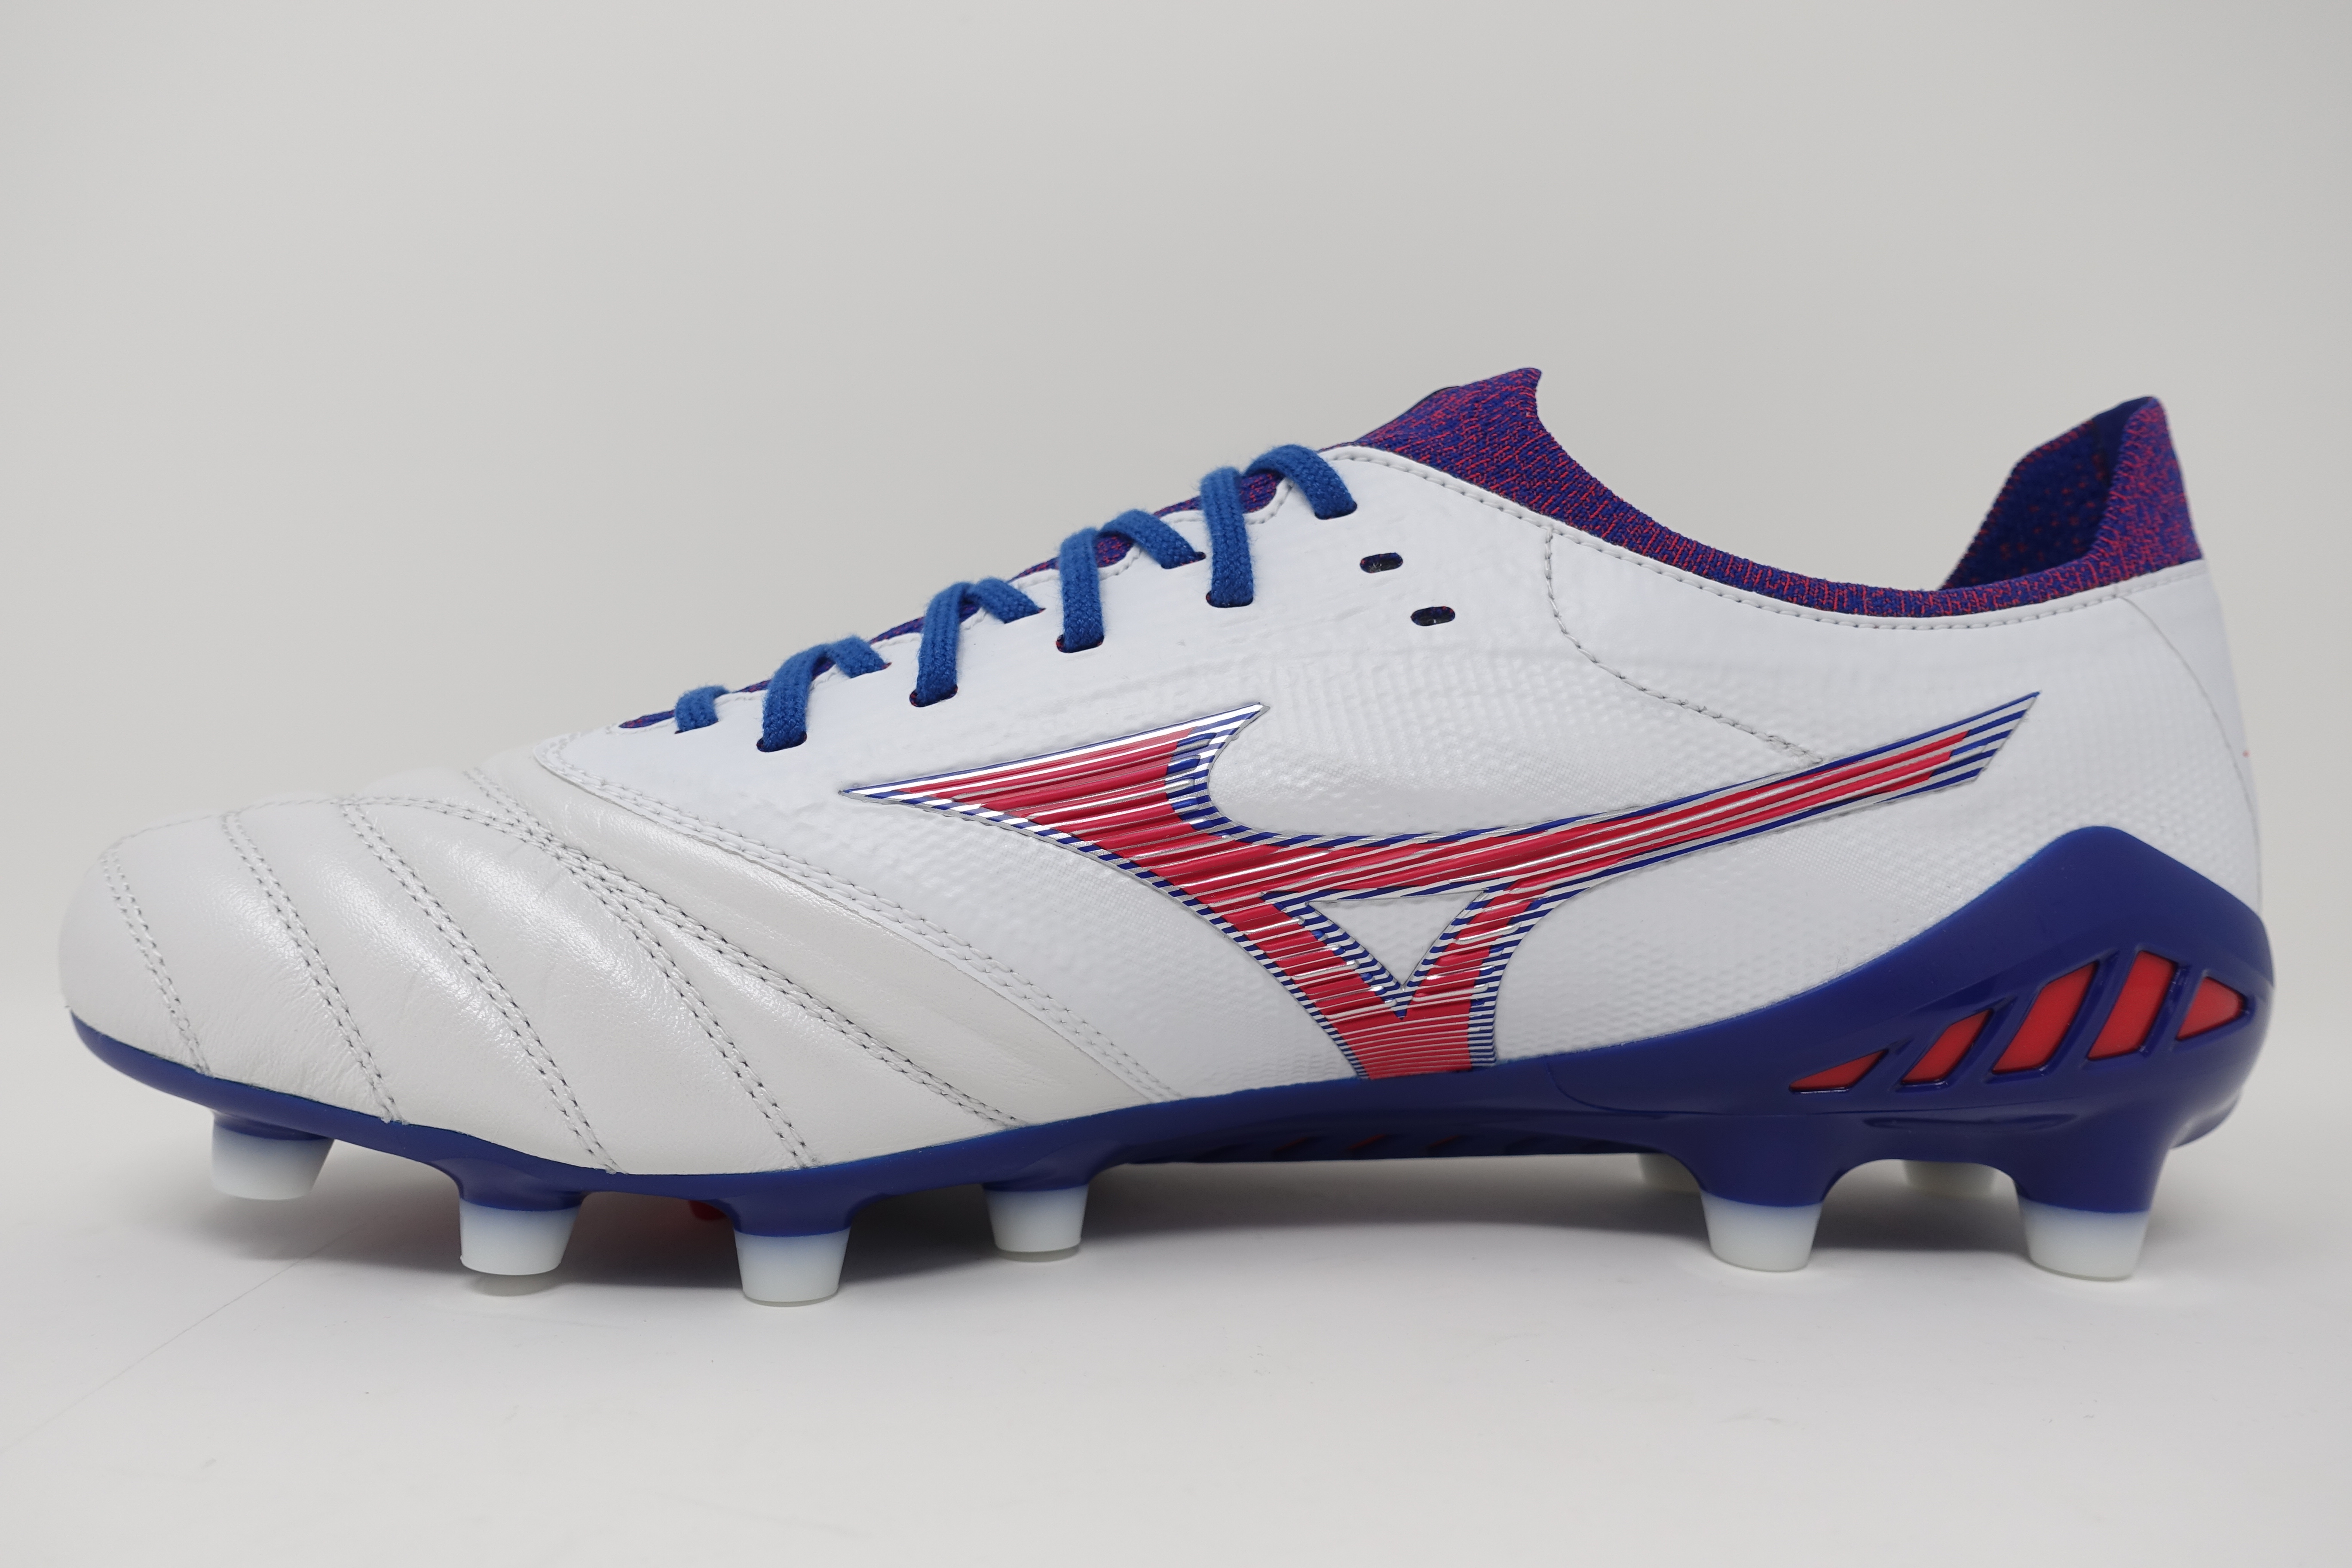 Mizuno-Morelia-Neo-3-Made-in-Japan-Next-Wave-Pack-Soccer-Football-Boots-4